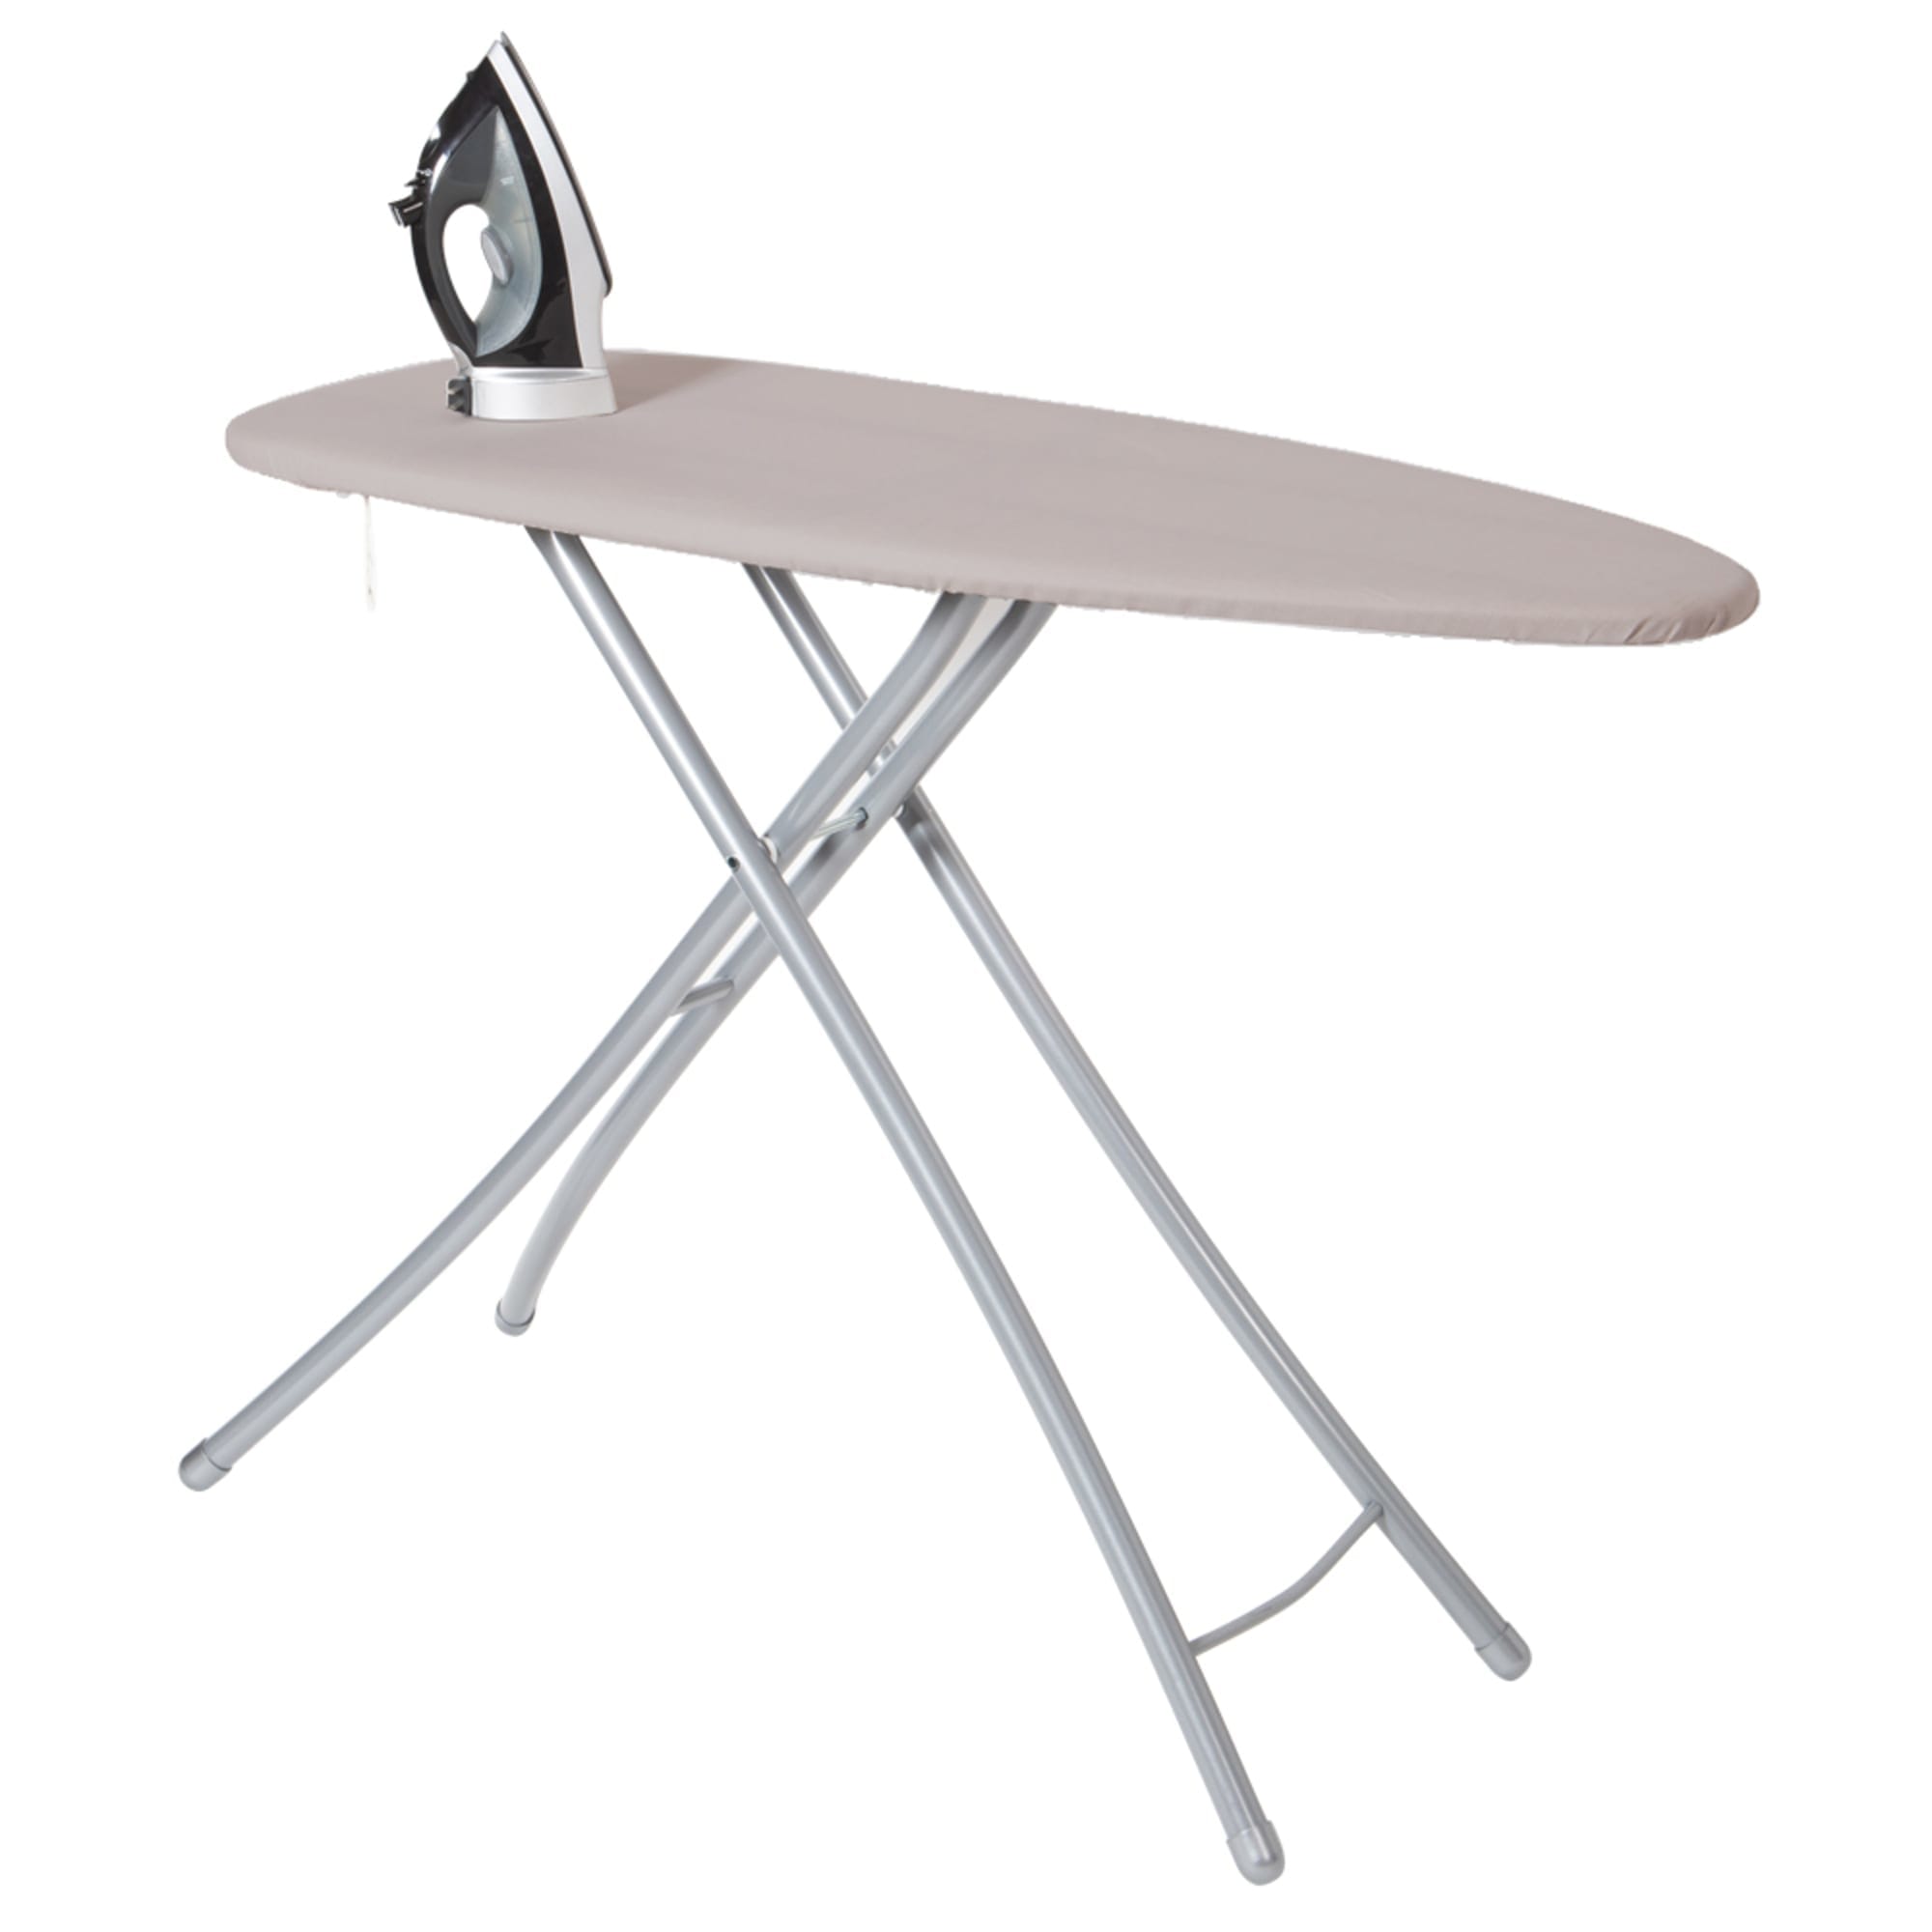 Seymour Home Products Adjustable Height, Wide Top Ironing Board, Greystone $50 EACH, CASE PACK OF 1